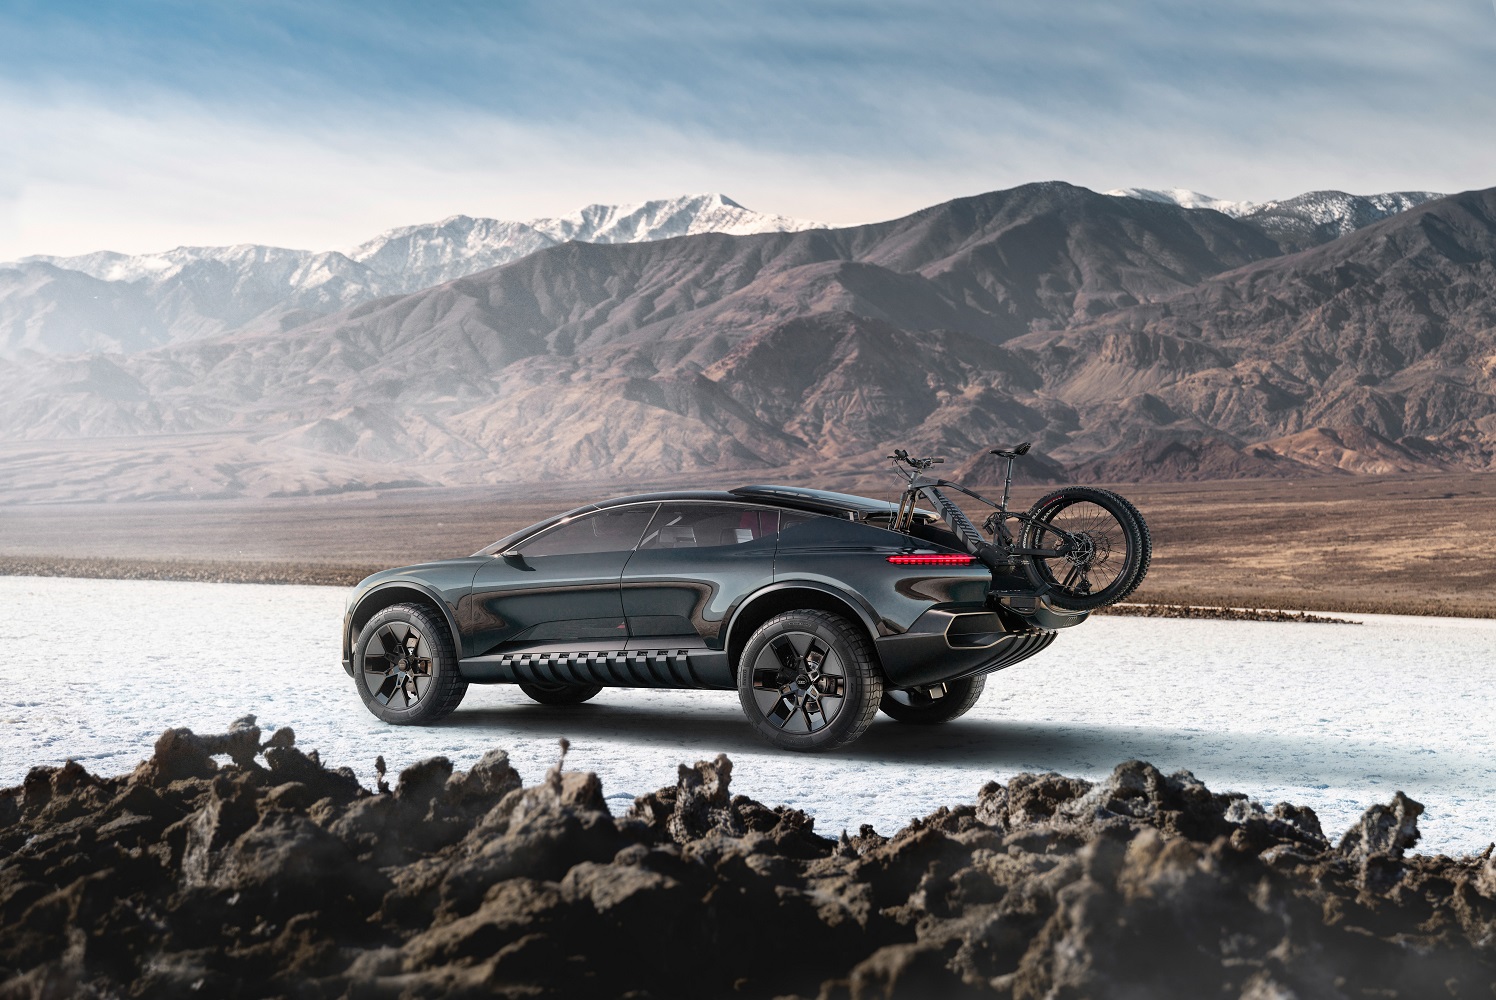 Audi ActiveSphere concept car in a mountainous setting with a bike on the rear rack.